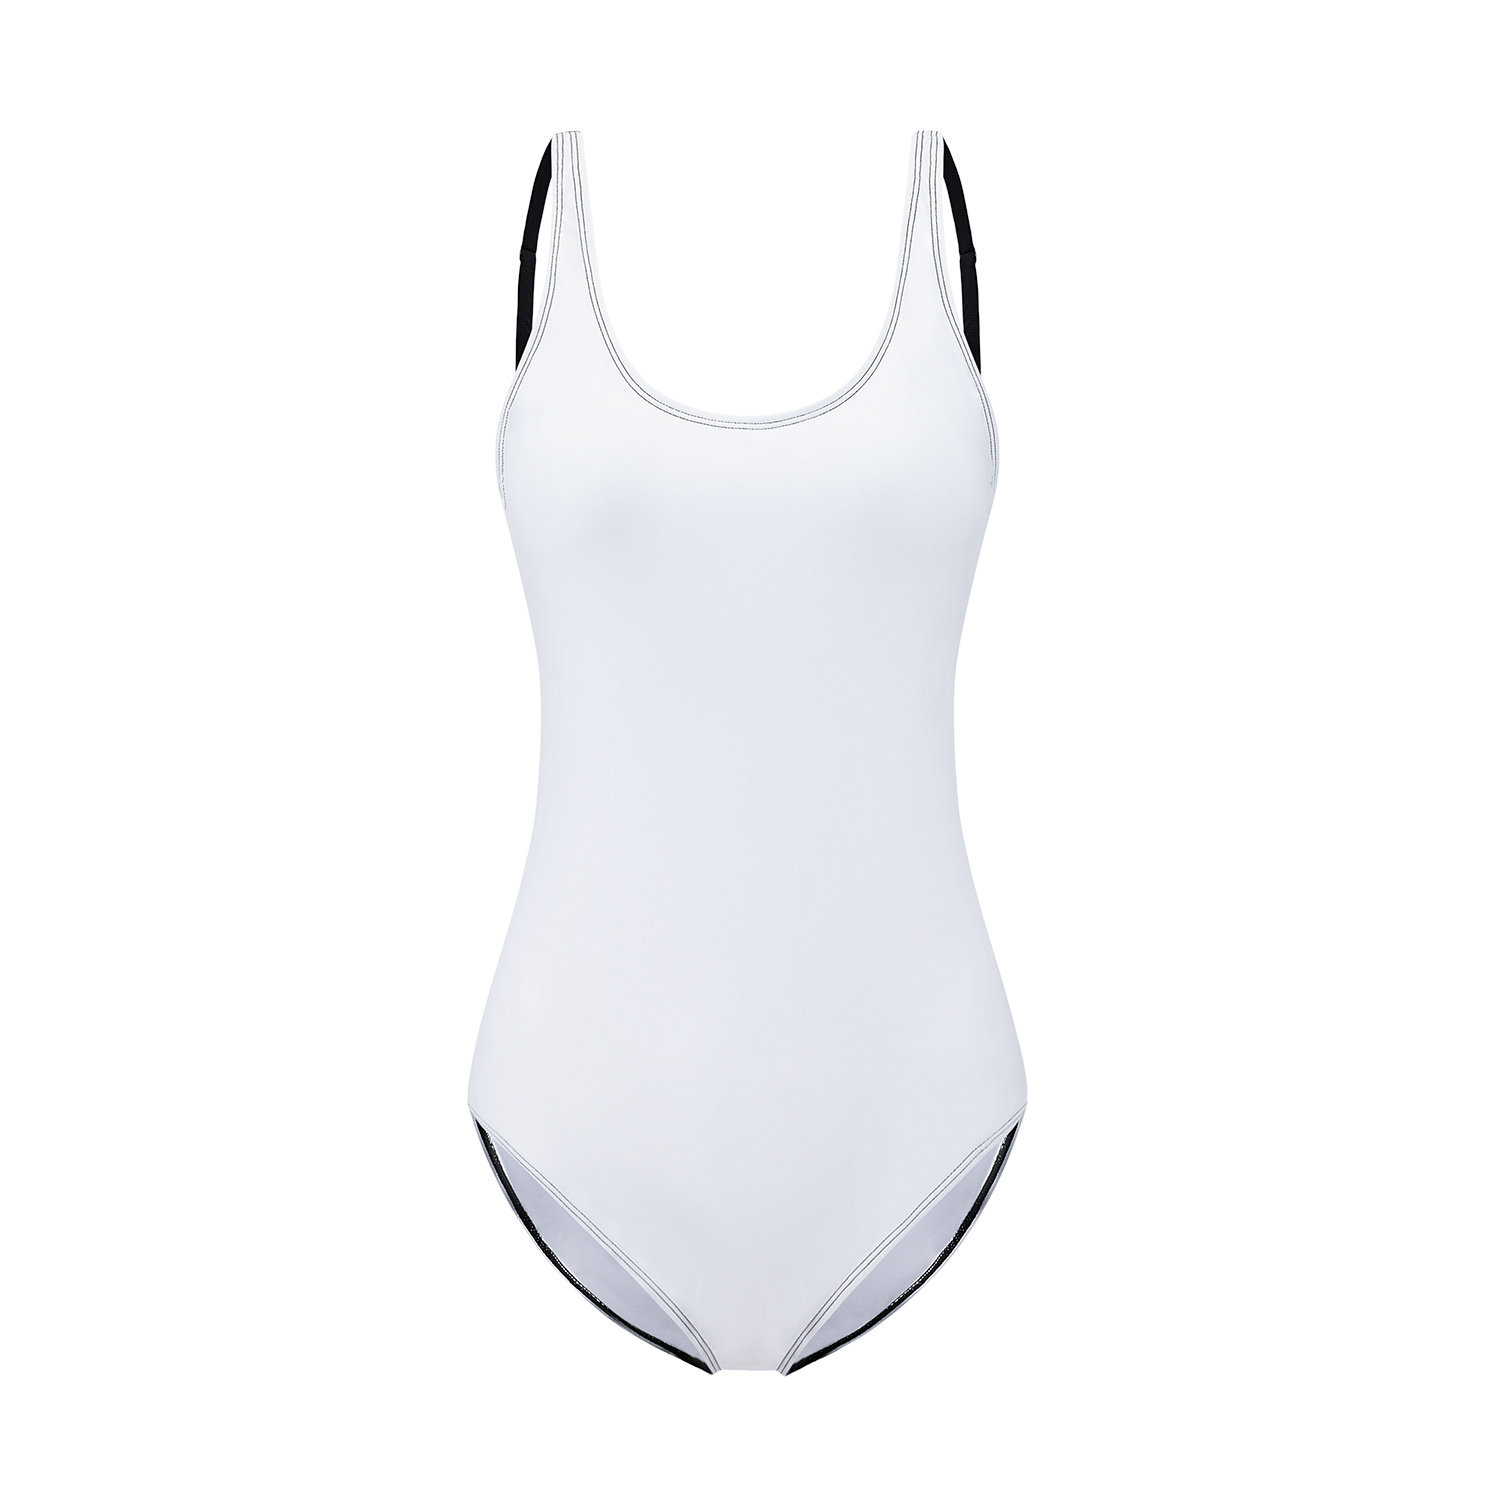 Customize Your Own All-Over Print Women's Swimsuit Soft & Stretchy - Print On Demand | HugePOD